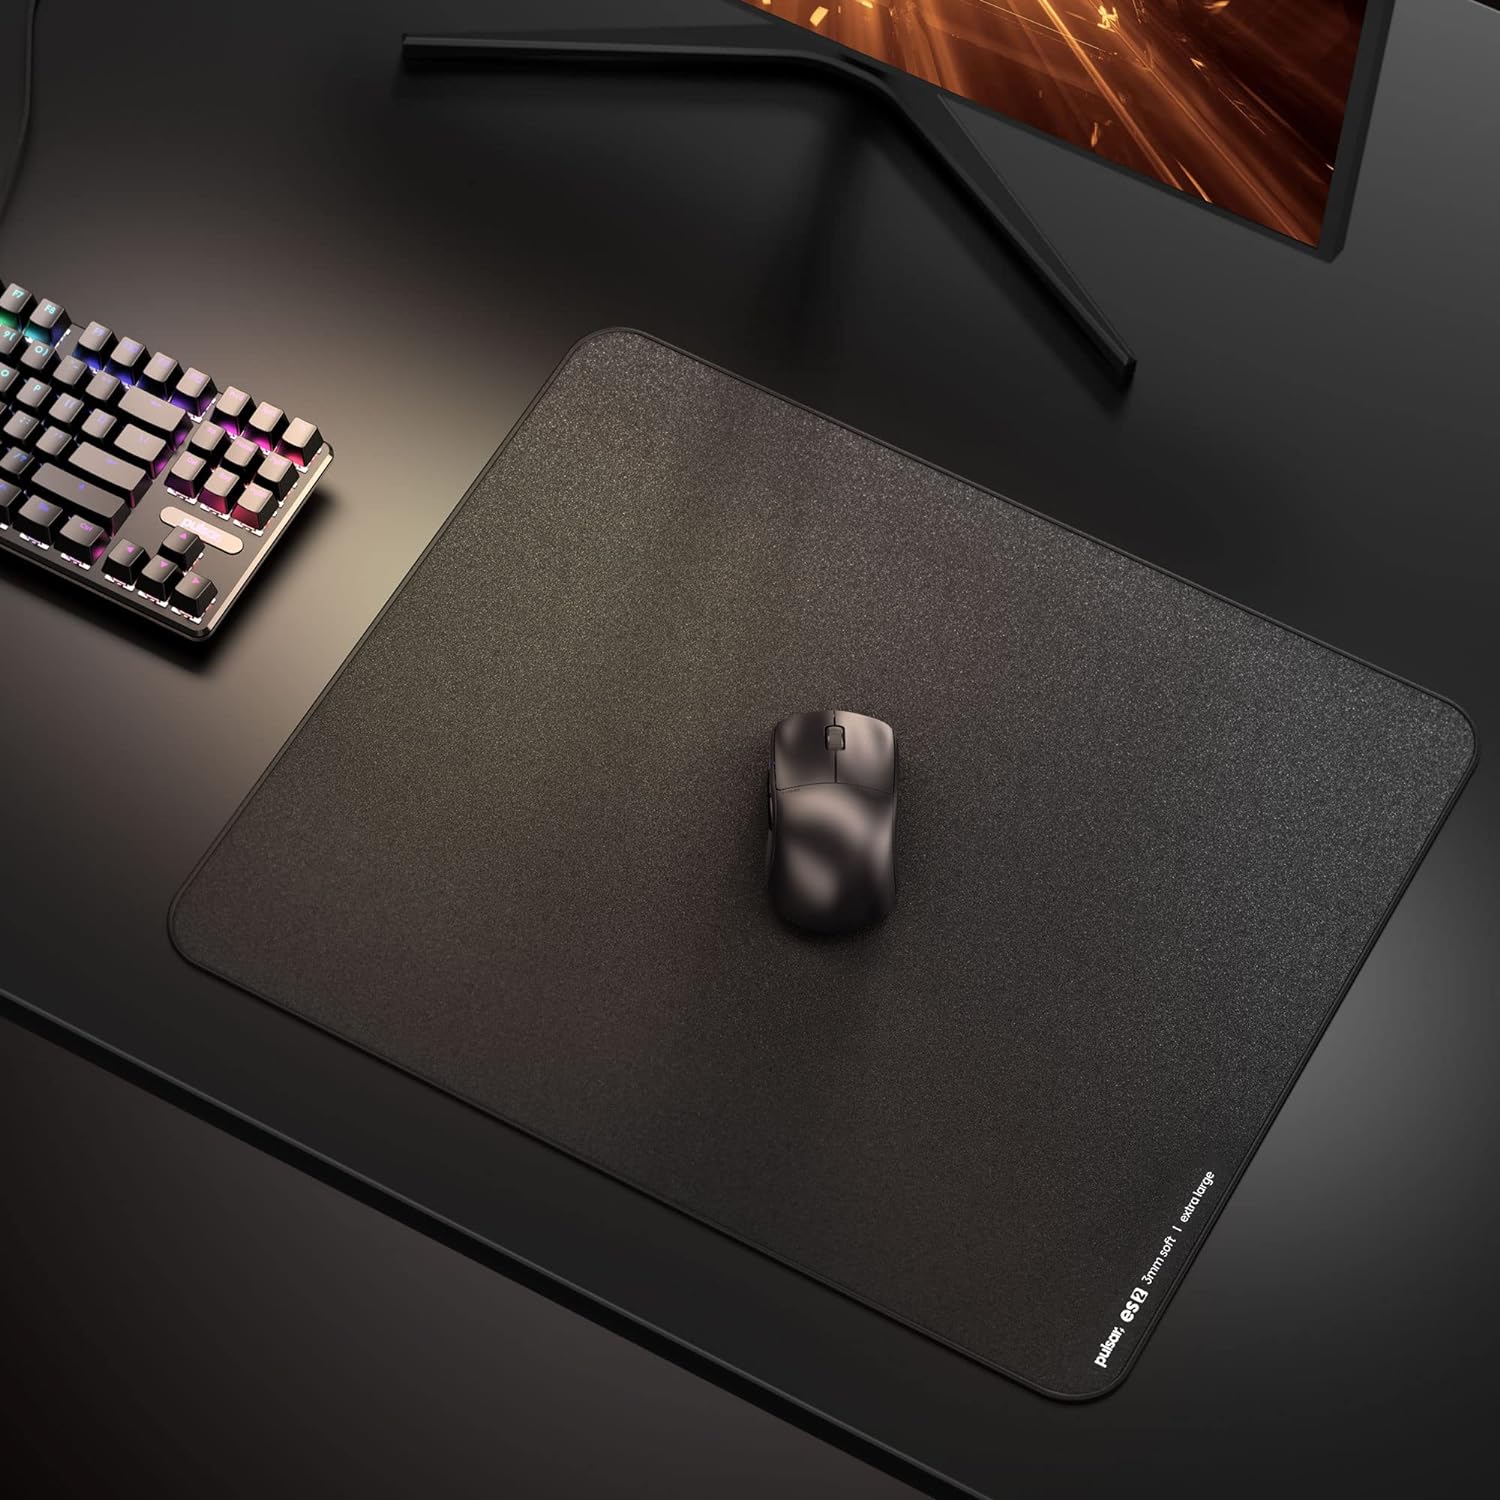 A large marketing image providing additional information about the product Pulsar ES2 Mousepad 3mm XL - Black - Additional alt info not provided